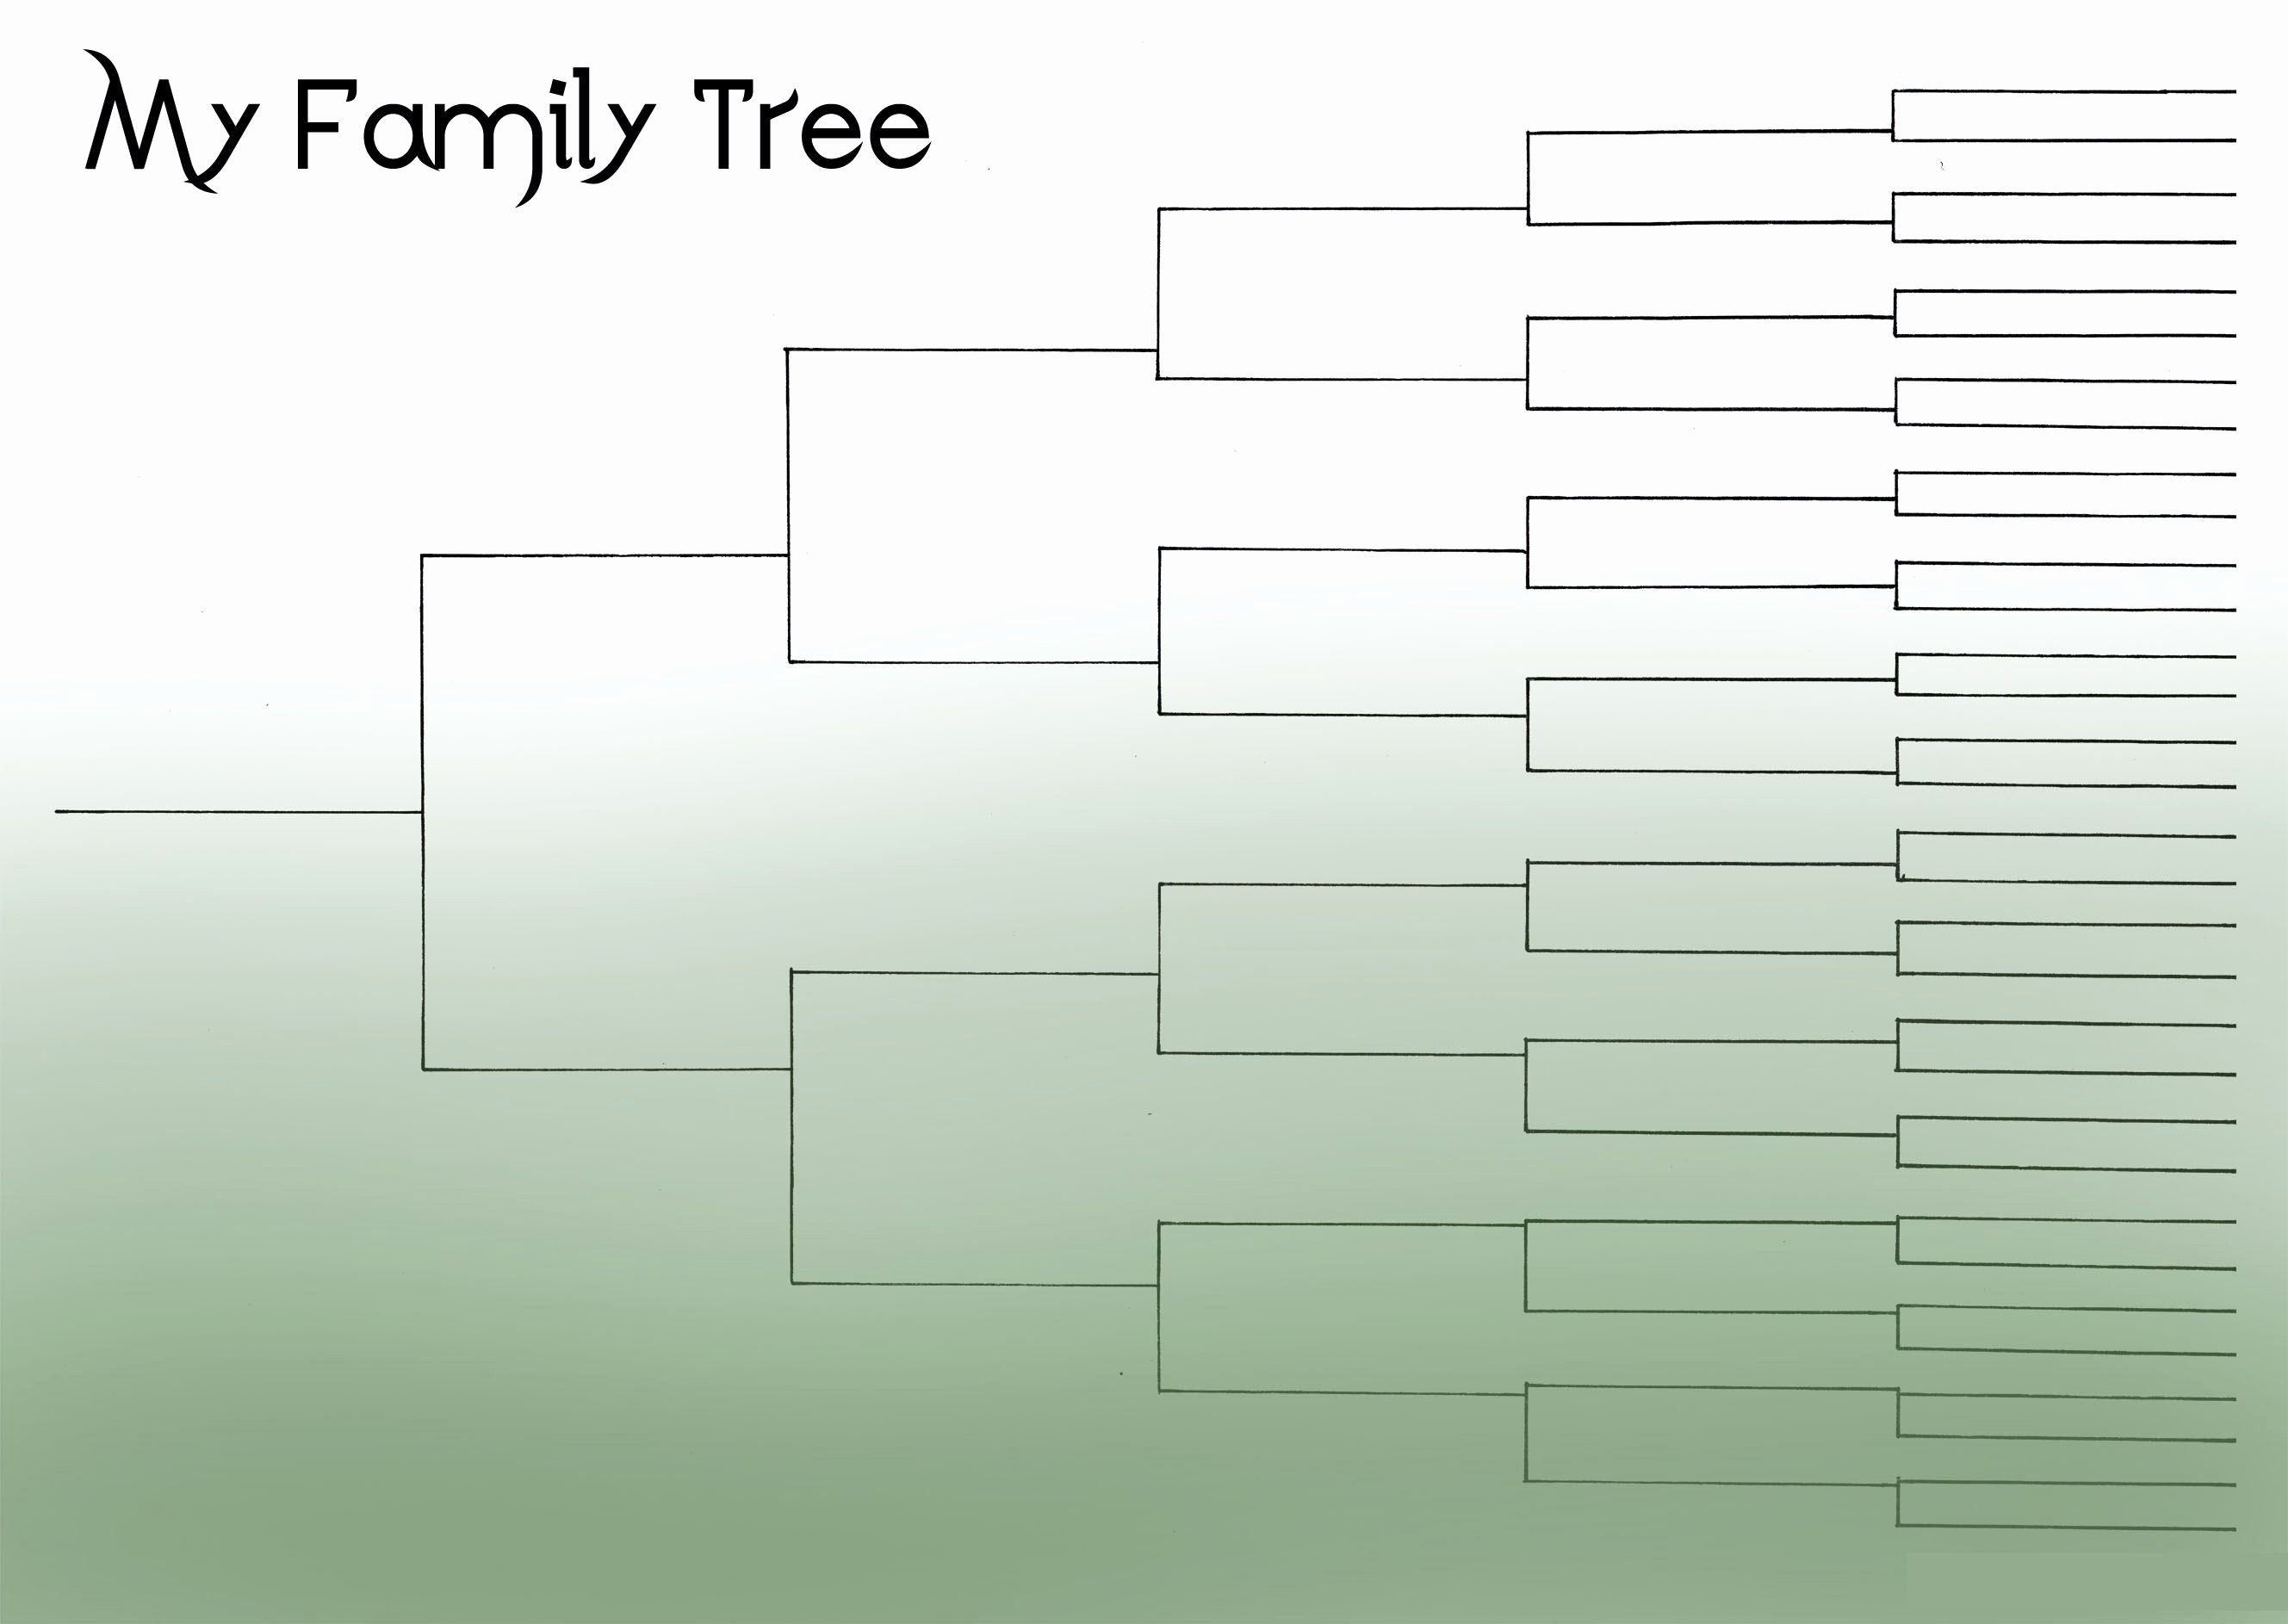 Free Editable Family Tree Templates Best Of Free Editable Family Tree Template Daily Roabox